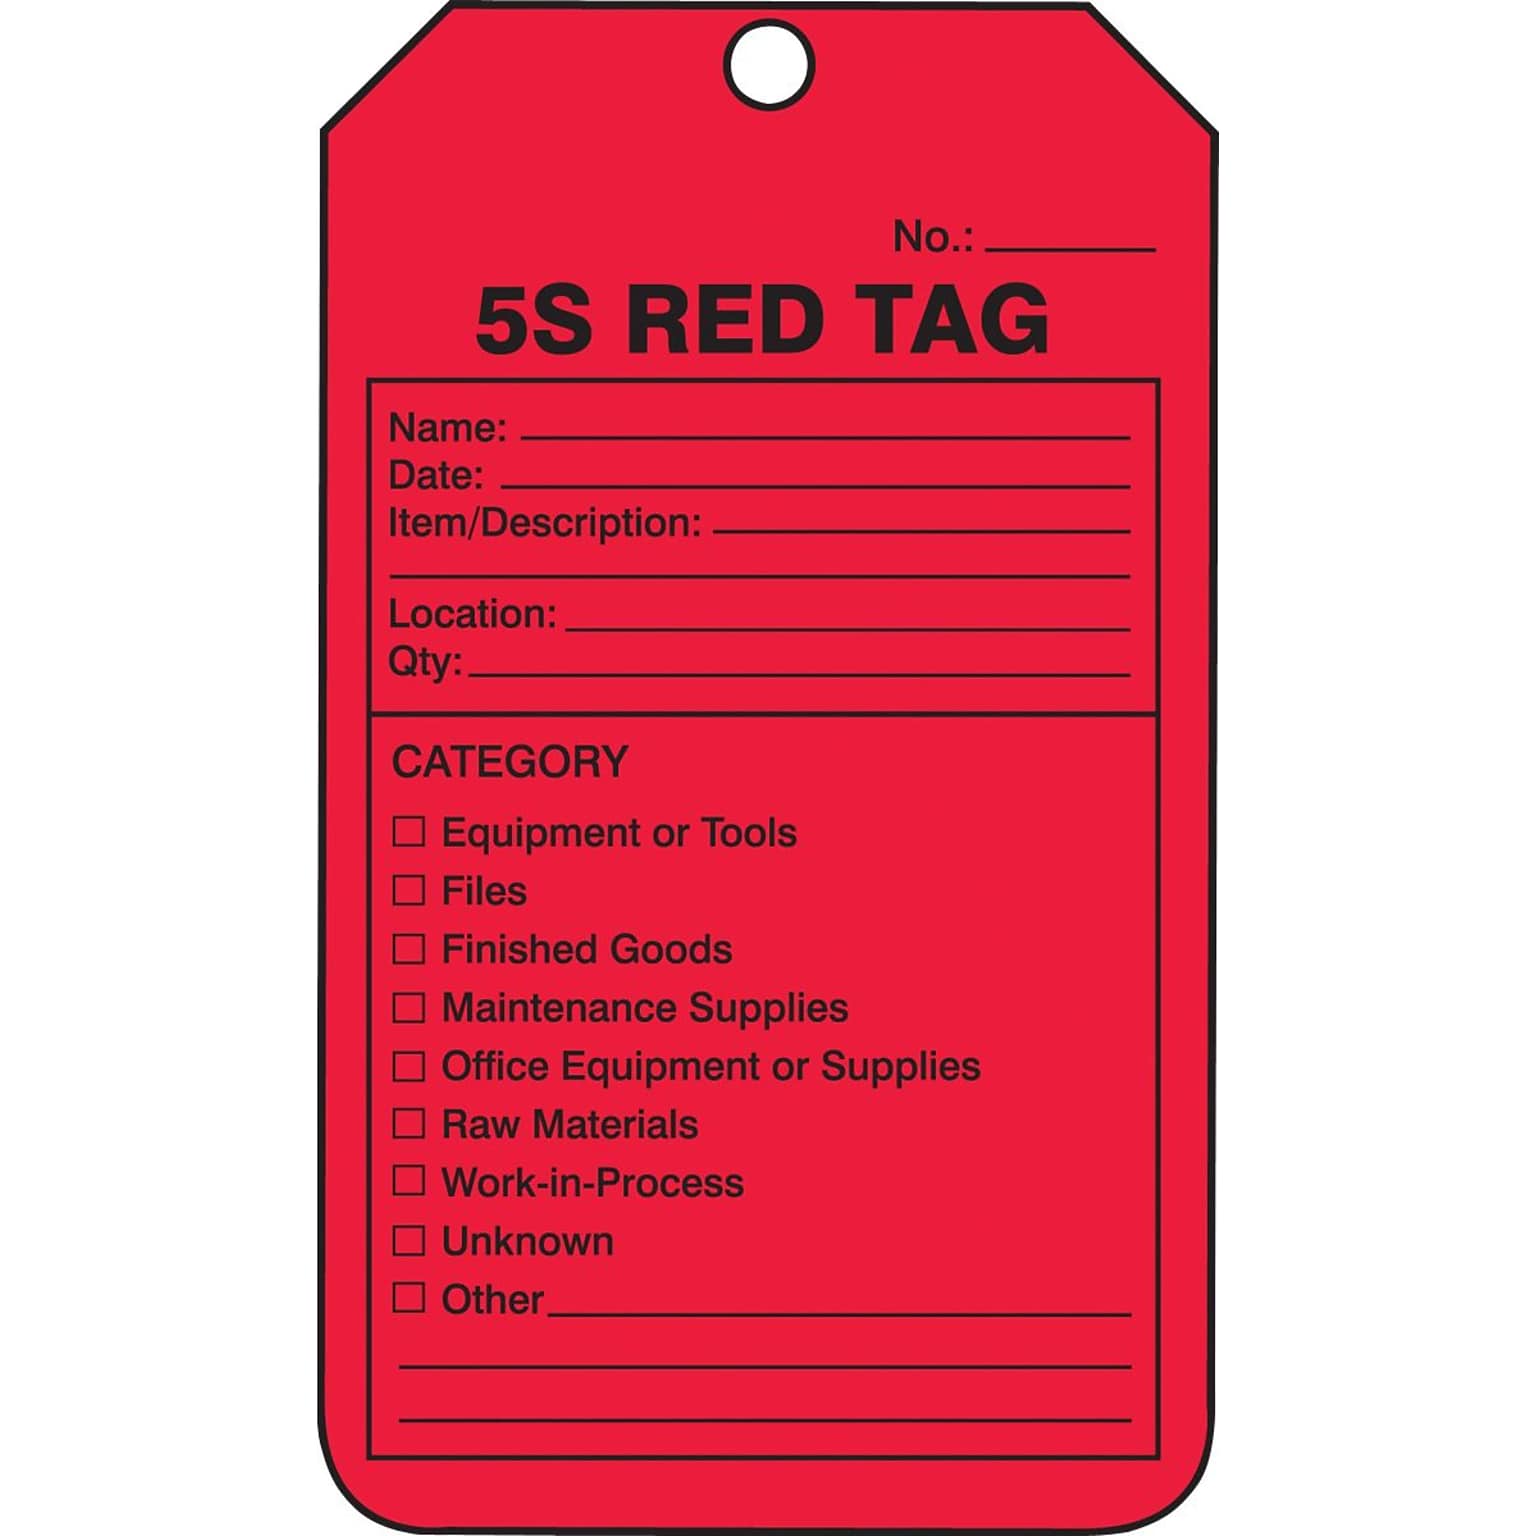 Accuform Production Control Tag, 5S RED TAG, 5 3/4 x 3 1/4, PF-Cardstock, 25/Pack (MMT105CTP)